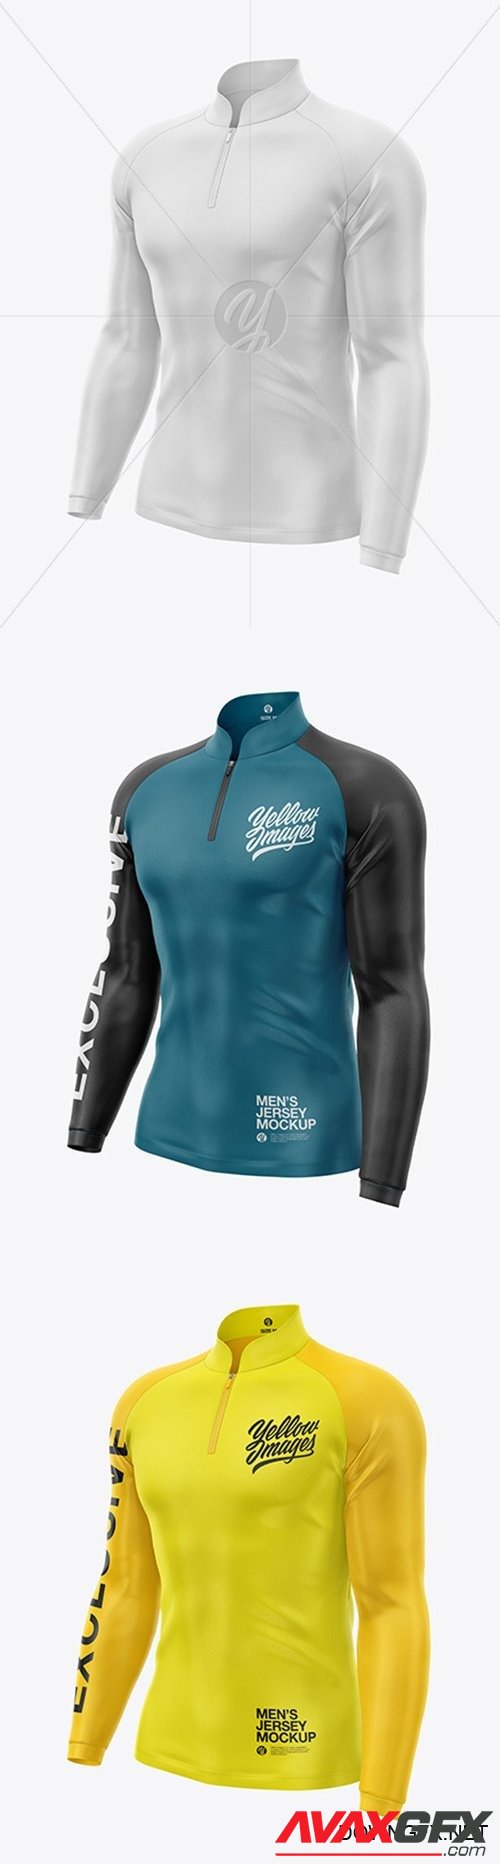 Mens Jersey With Long Sleeve Mockup - Front Half Side View 49461